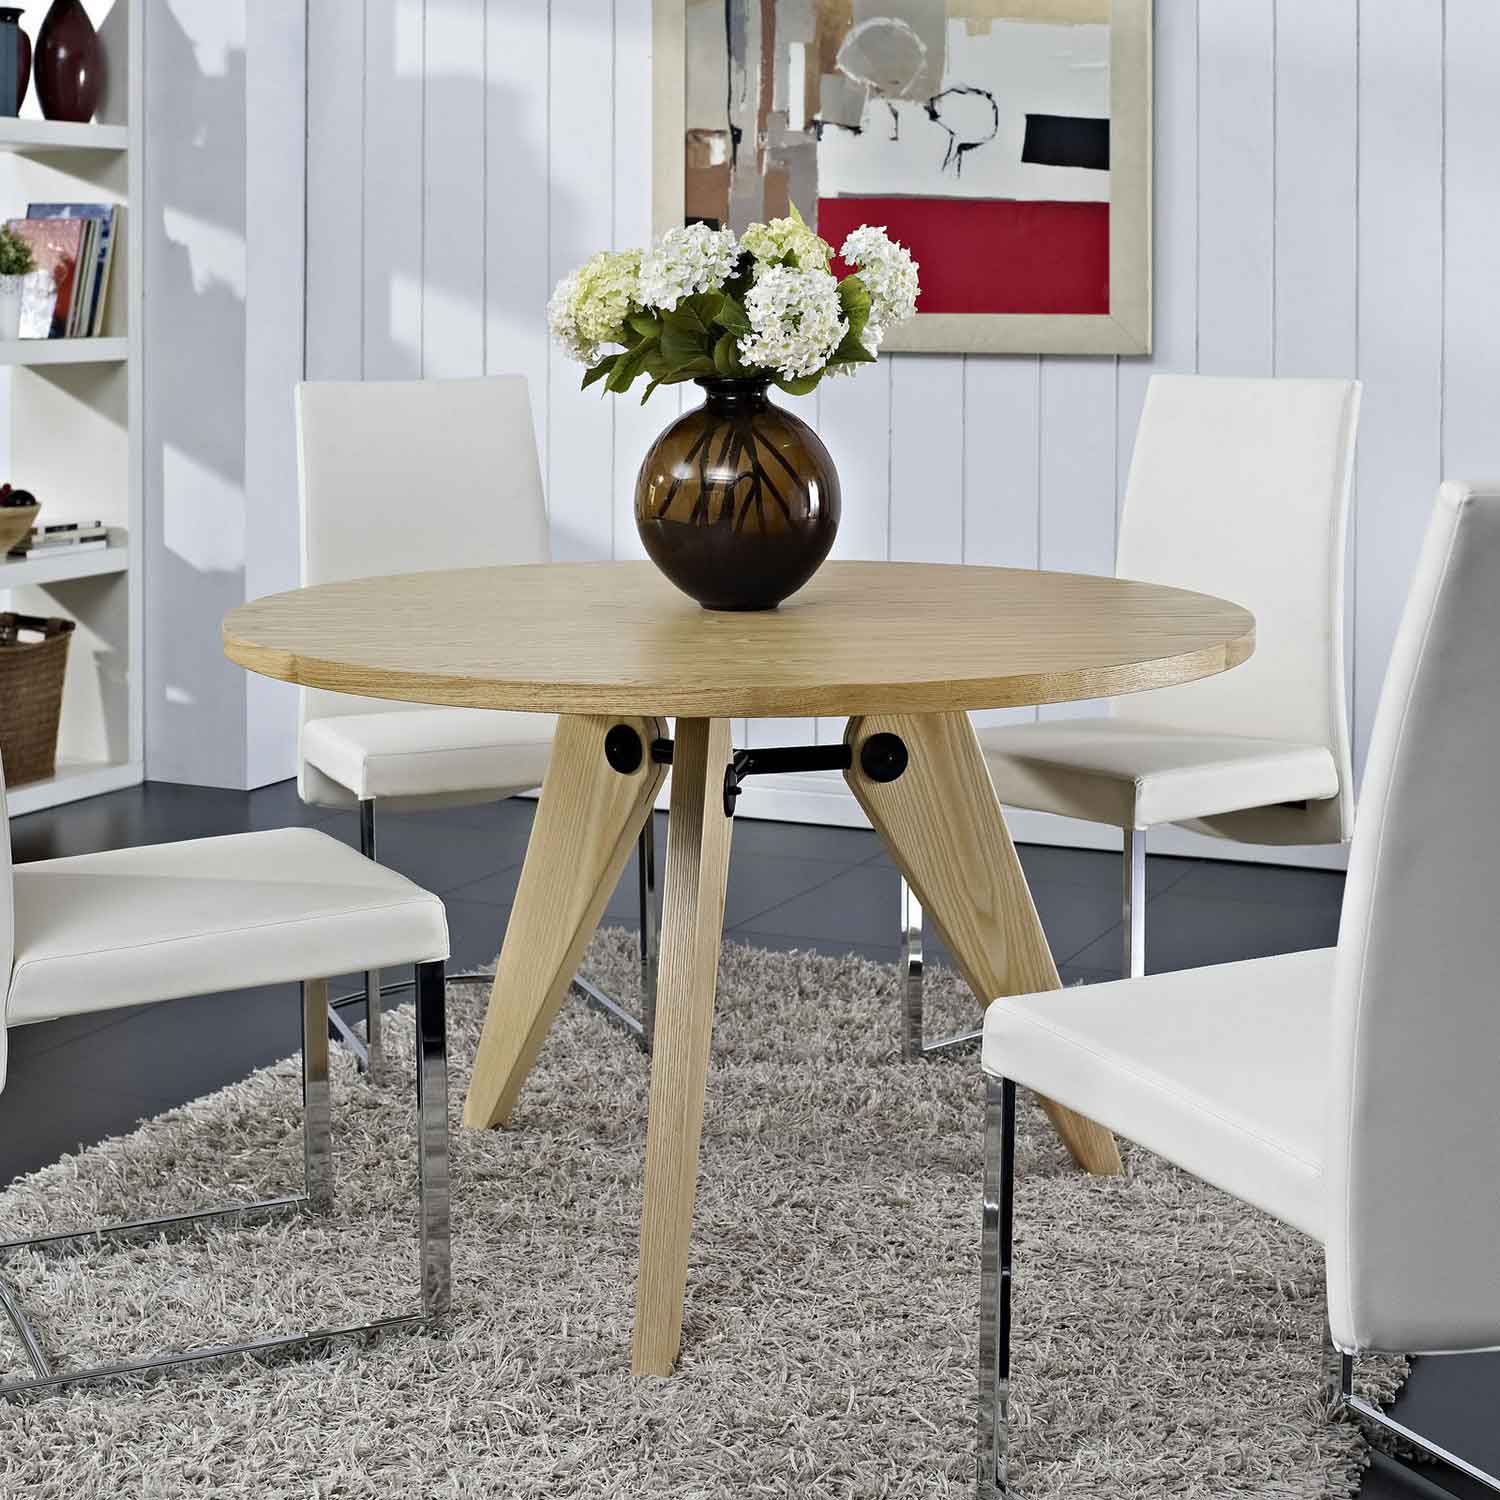 Modway Laurel Dining Table - Natural